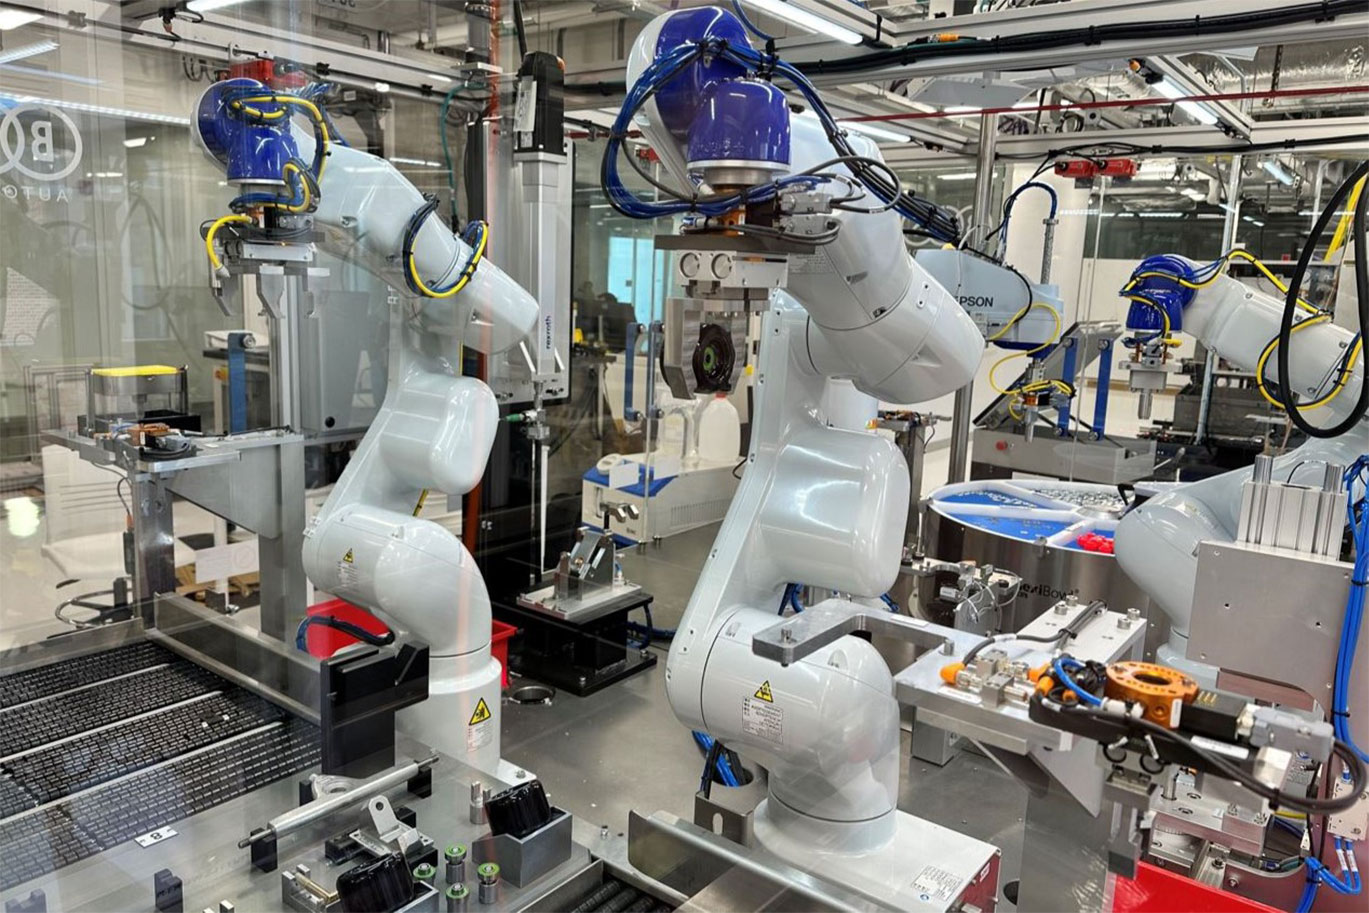 Robotic devices in the Smart Learning Factory, provided by BBS Automation. BBS helps industry develop automated processes and lower energy costs. (Purdue University photo/John O'Malley)